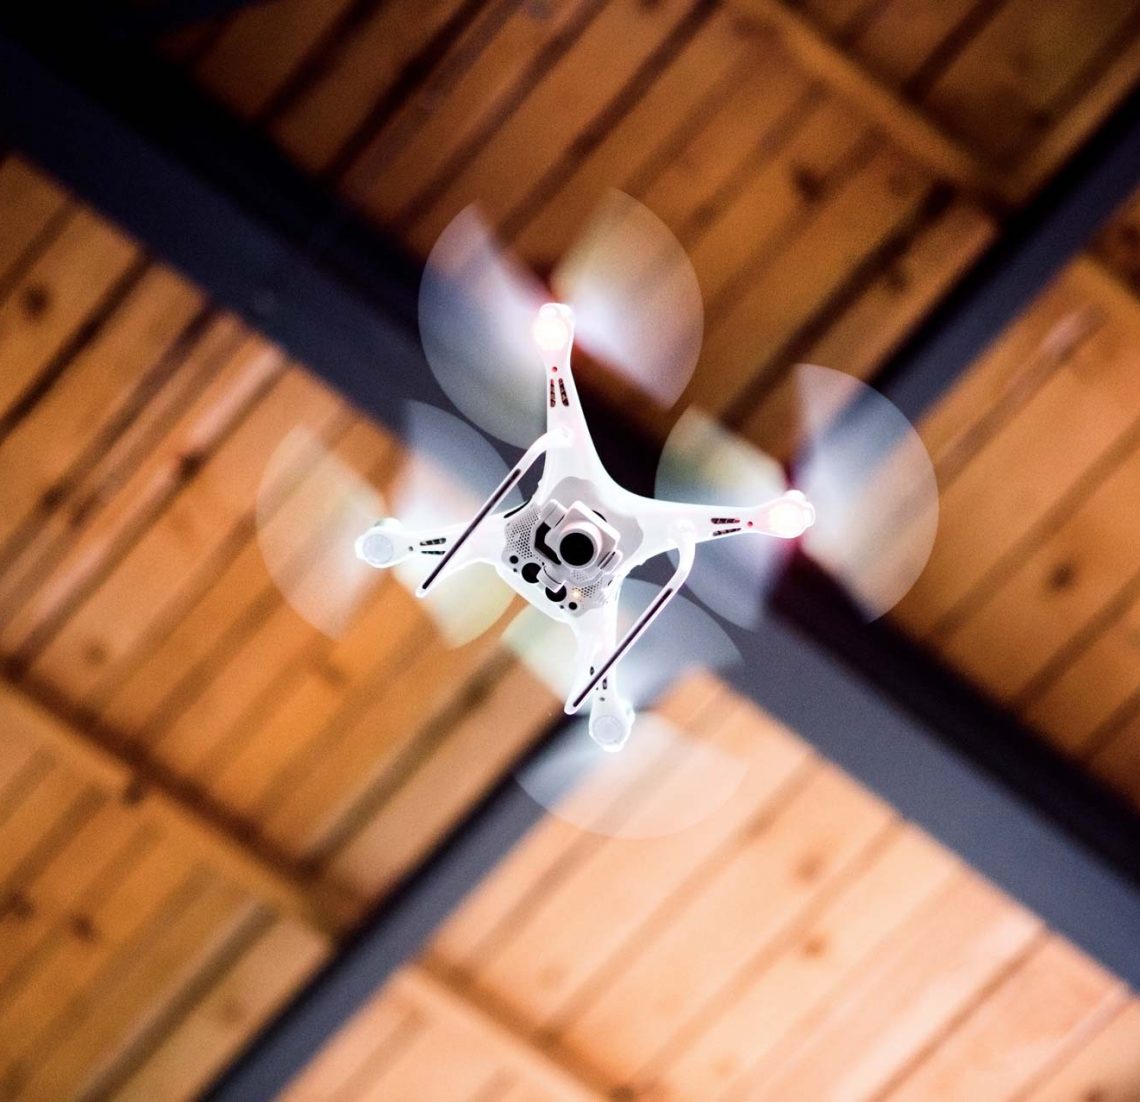 white-drone-flying-inside-the-building-PBW66A6.jpg